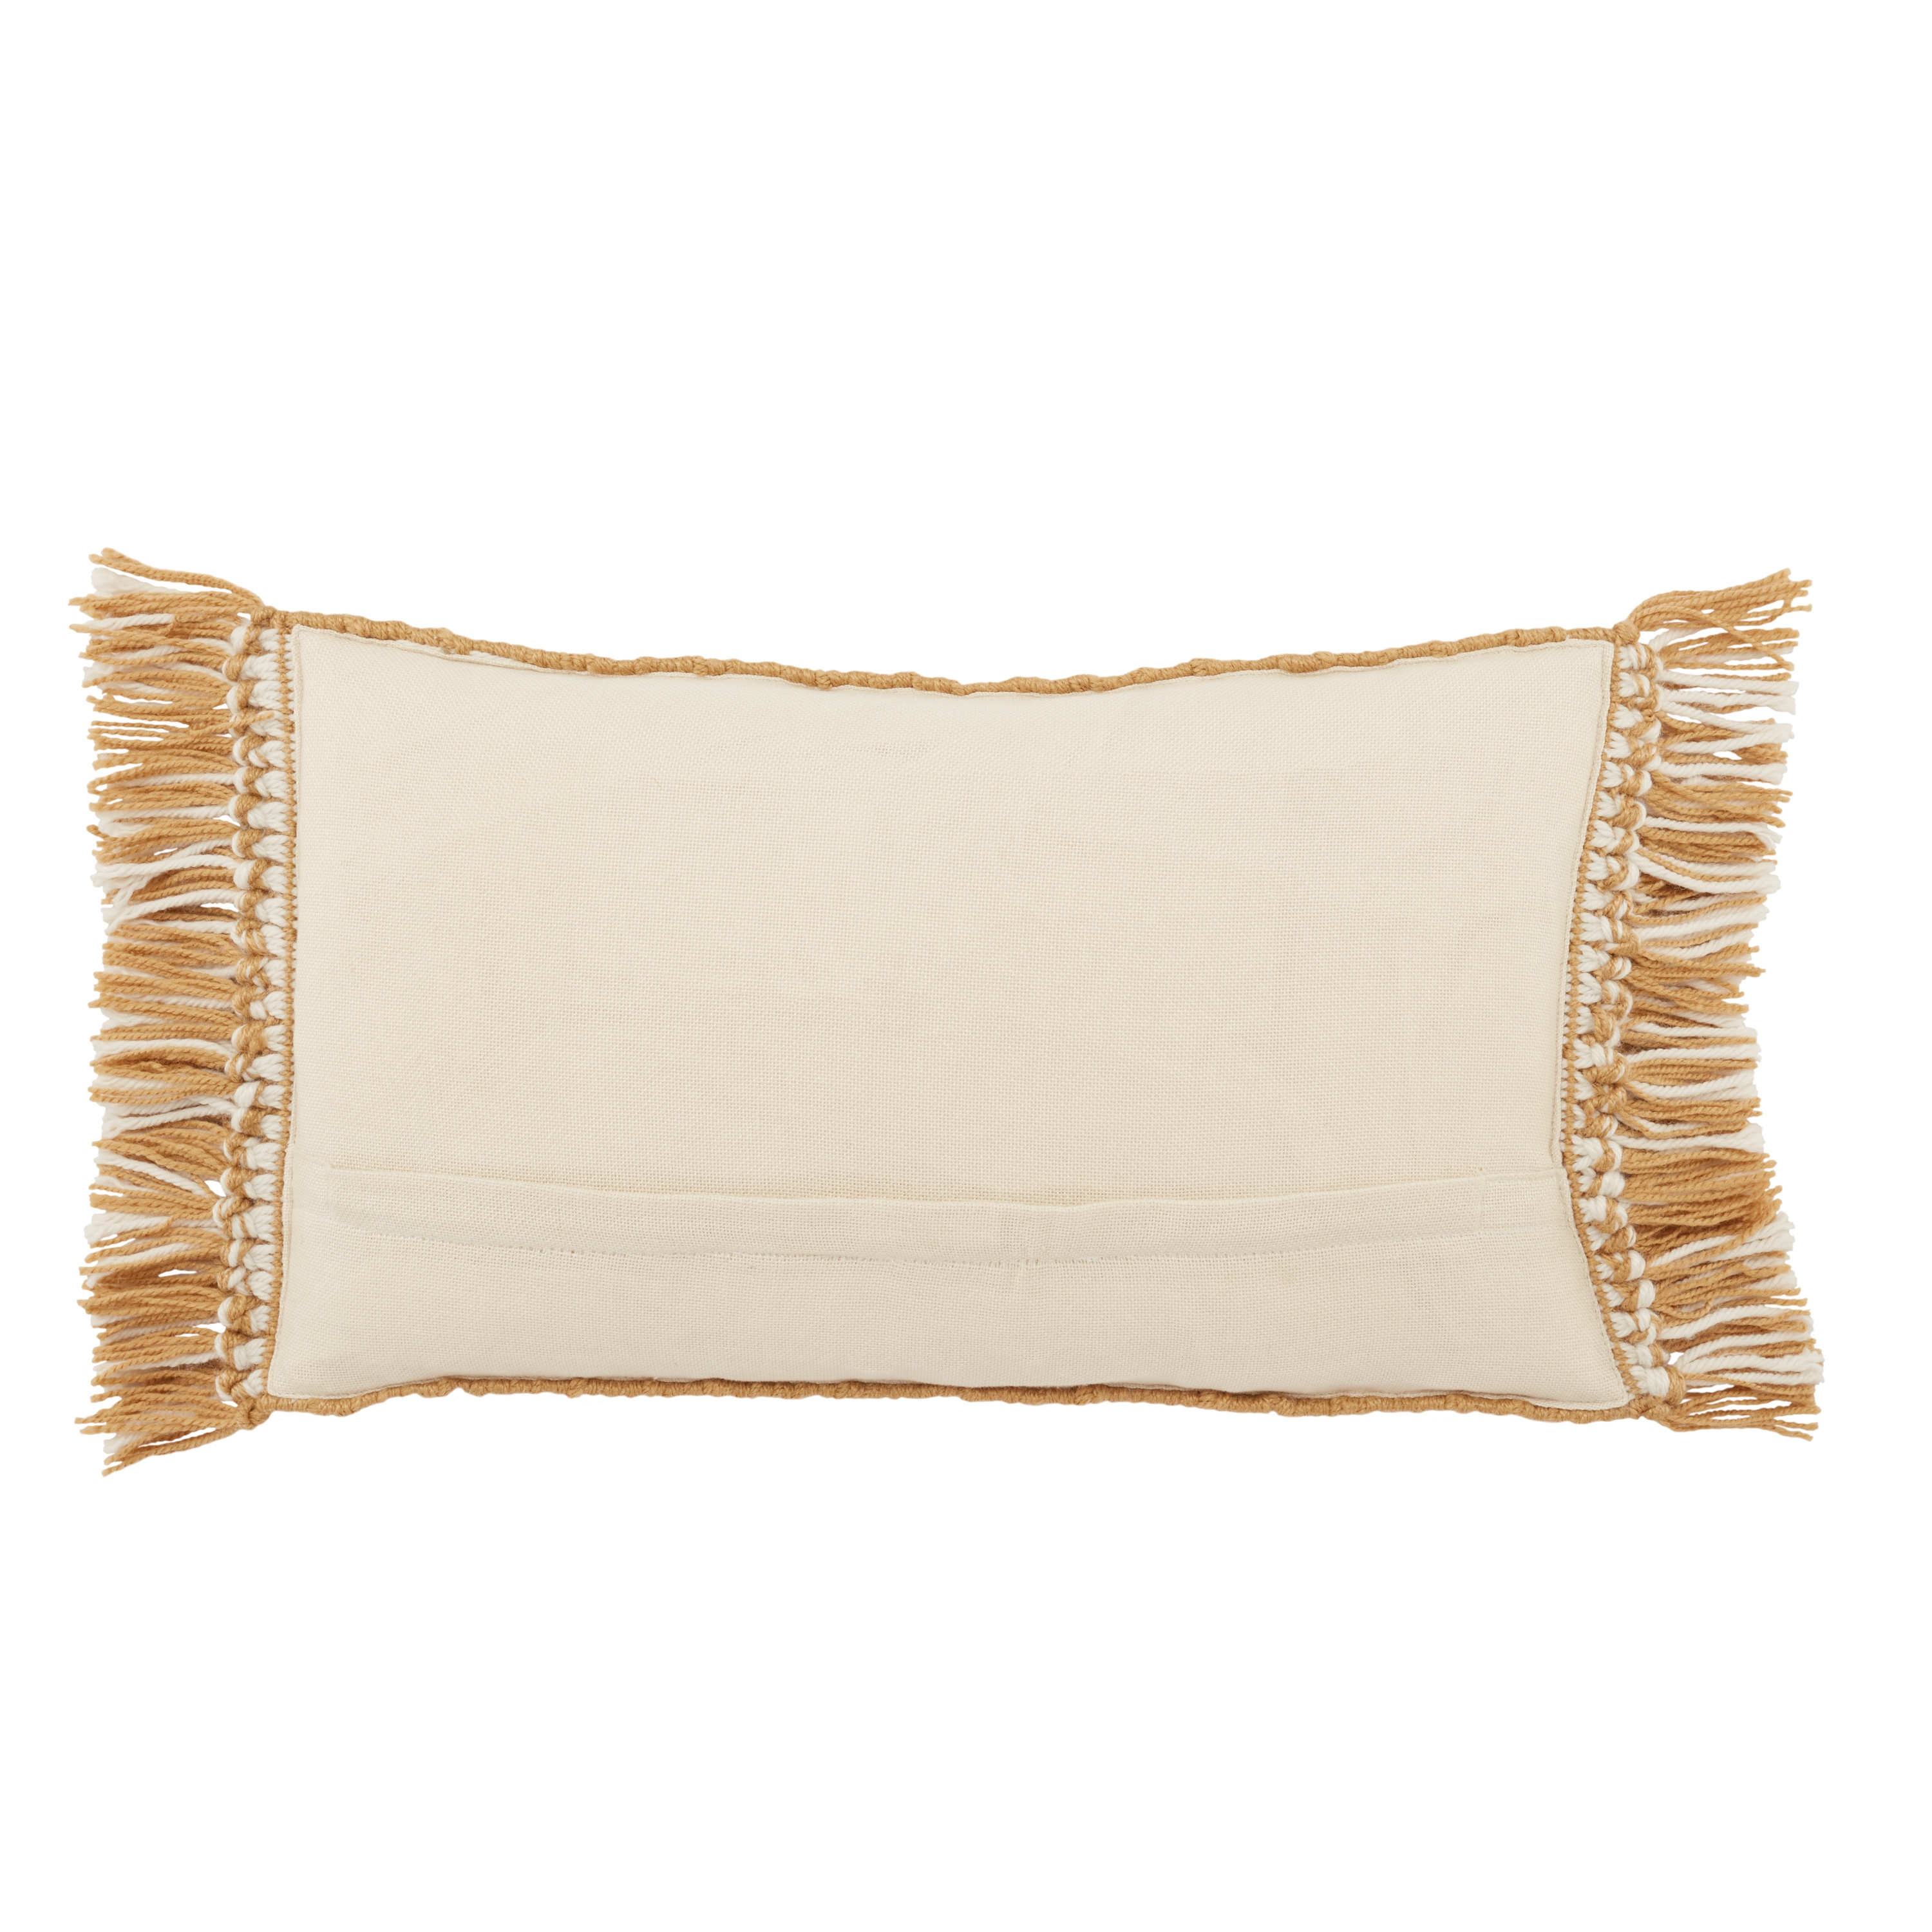 Chesa Lumbar Pillow, Gold, 21" x 13" (Cover Only) - Image 1